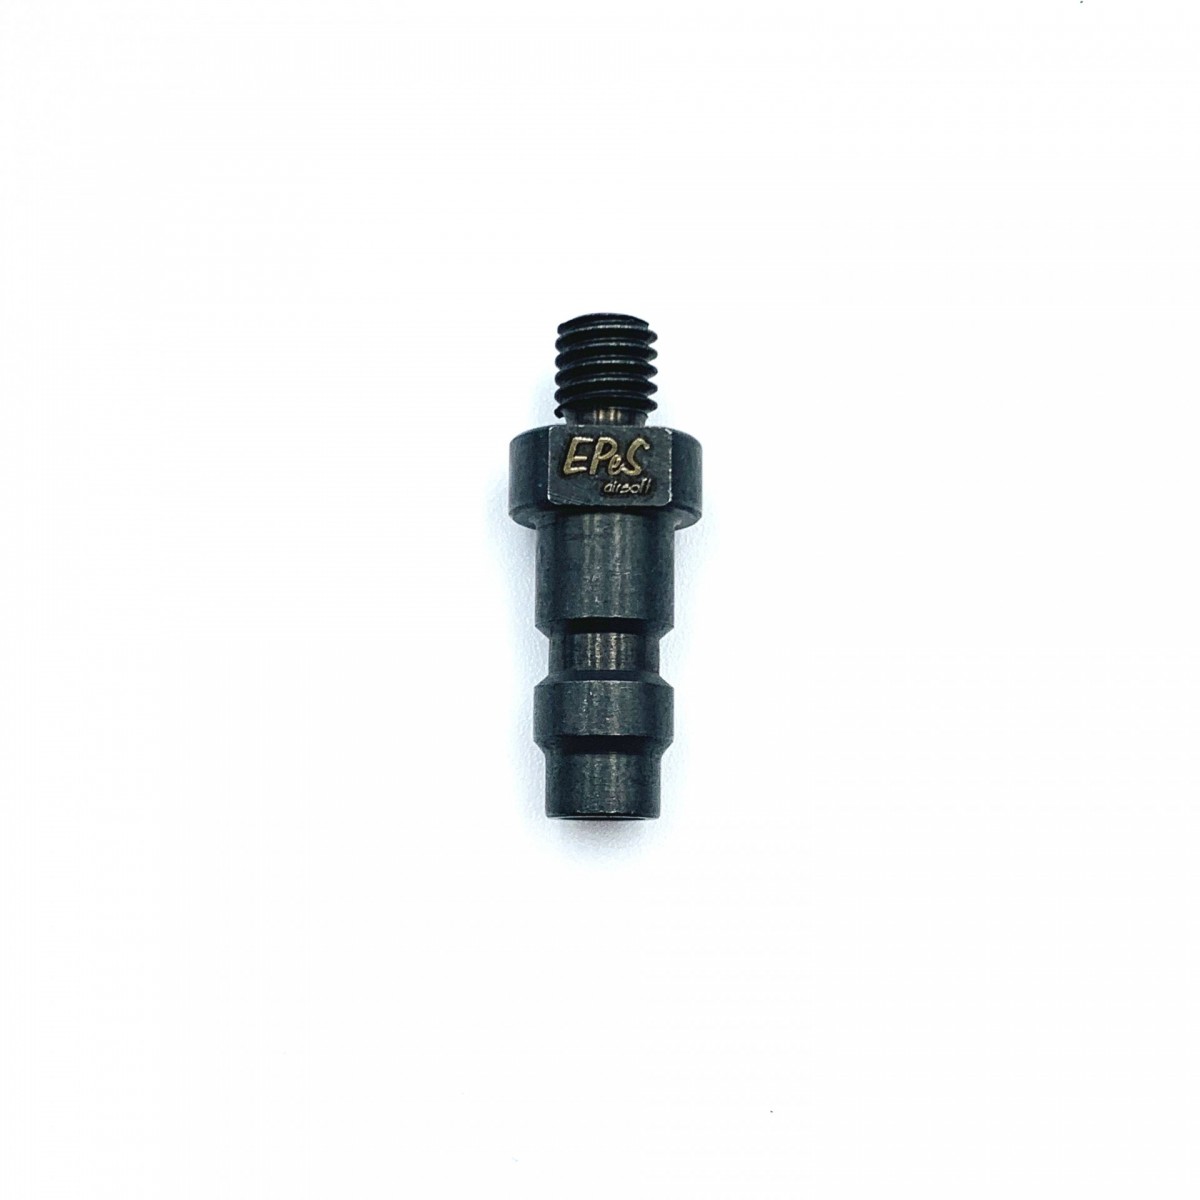 Epes HPA Adapter MK2 for M6 thread